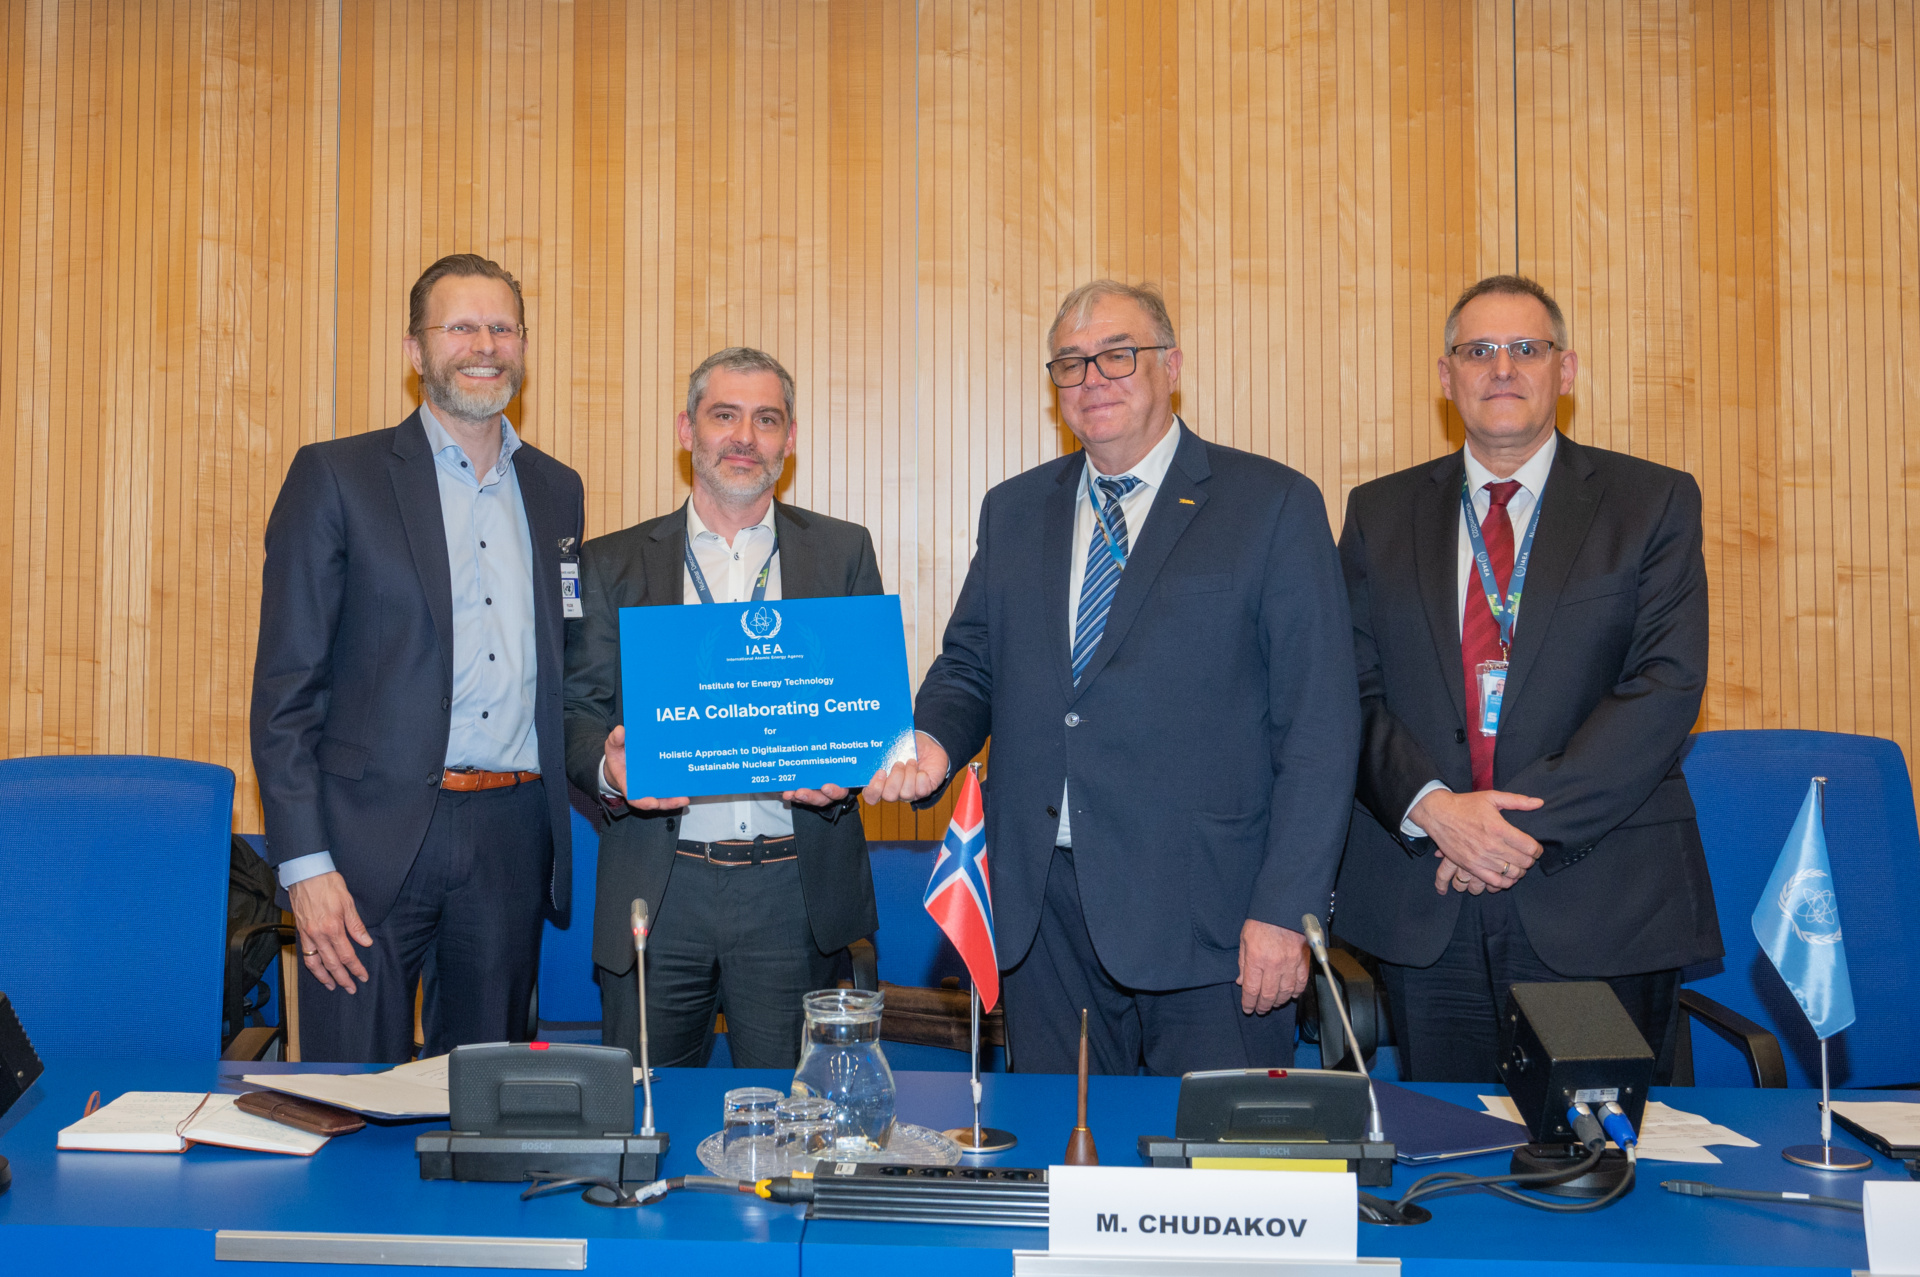 Tomas Nordlander and István Szőke receives the plaque that states that IFE is an IAEA collaborating centre Photo: Nancy Bellingan